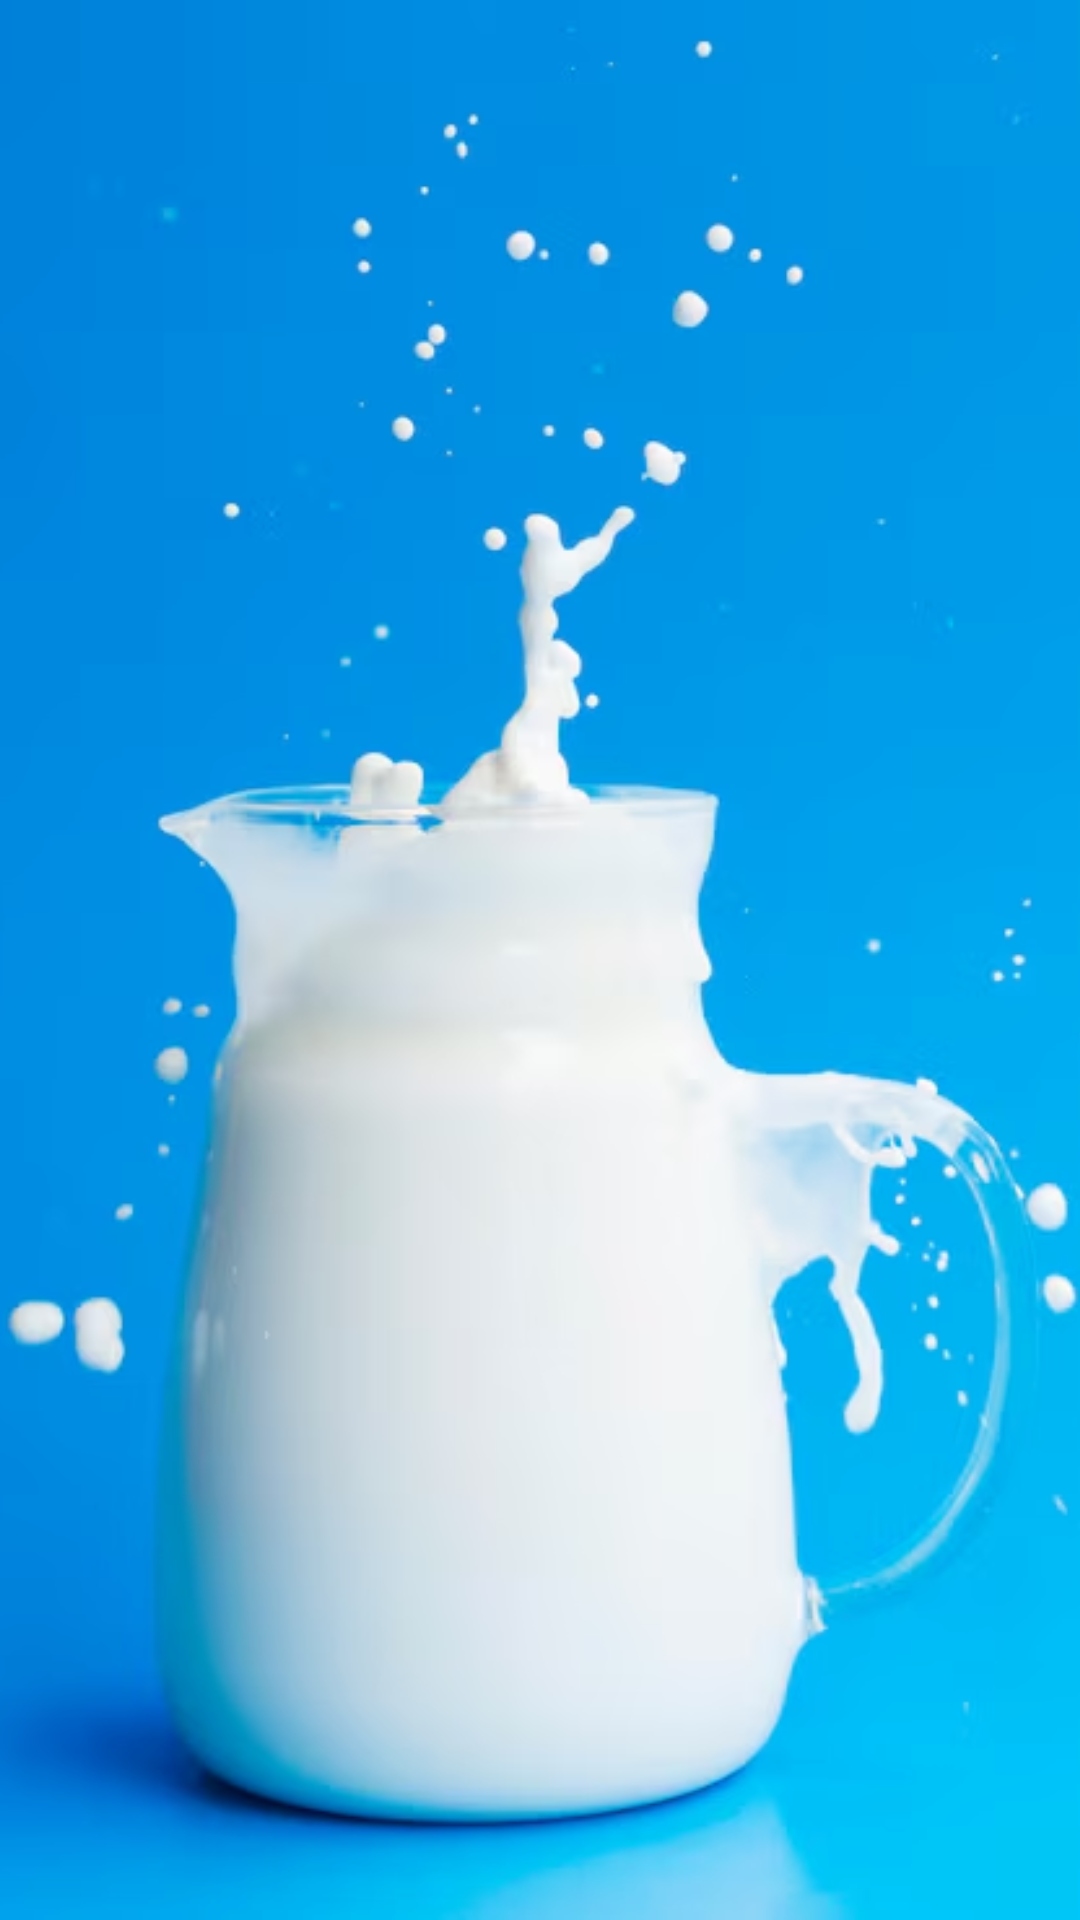 5 benefits of lactose-free diet